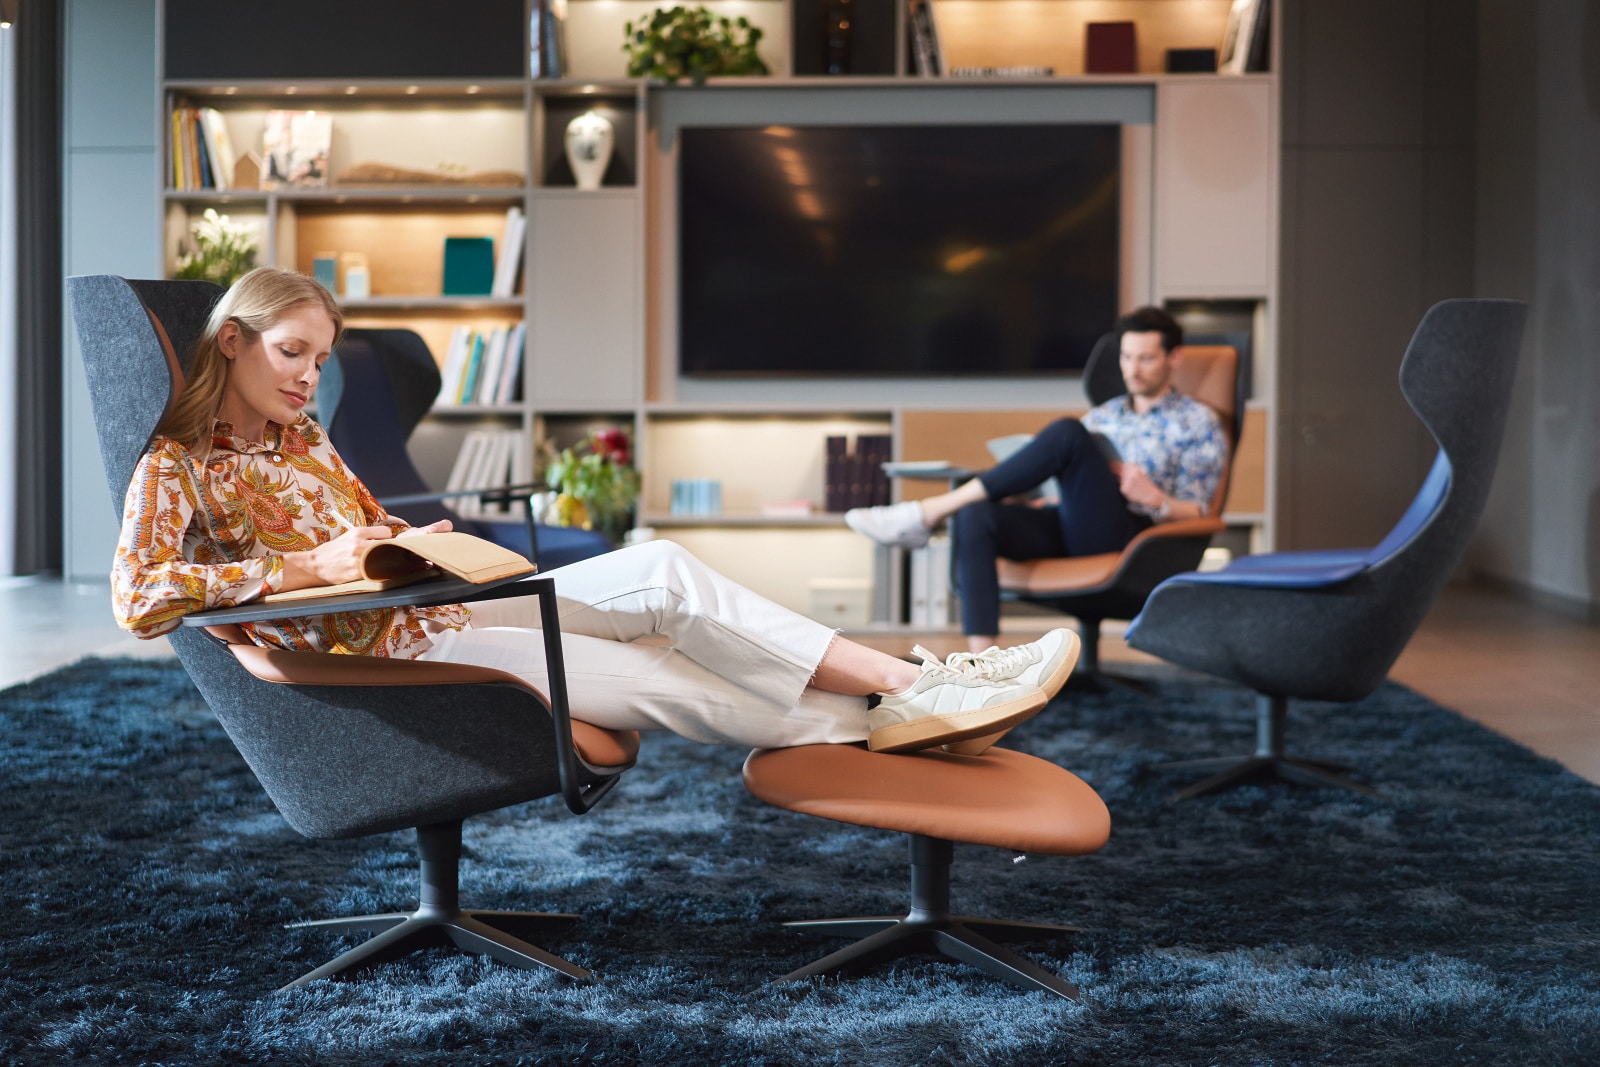 Outstanding achievement: Sedus receives the German Design Award for the se:lounge chair